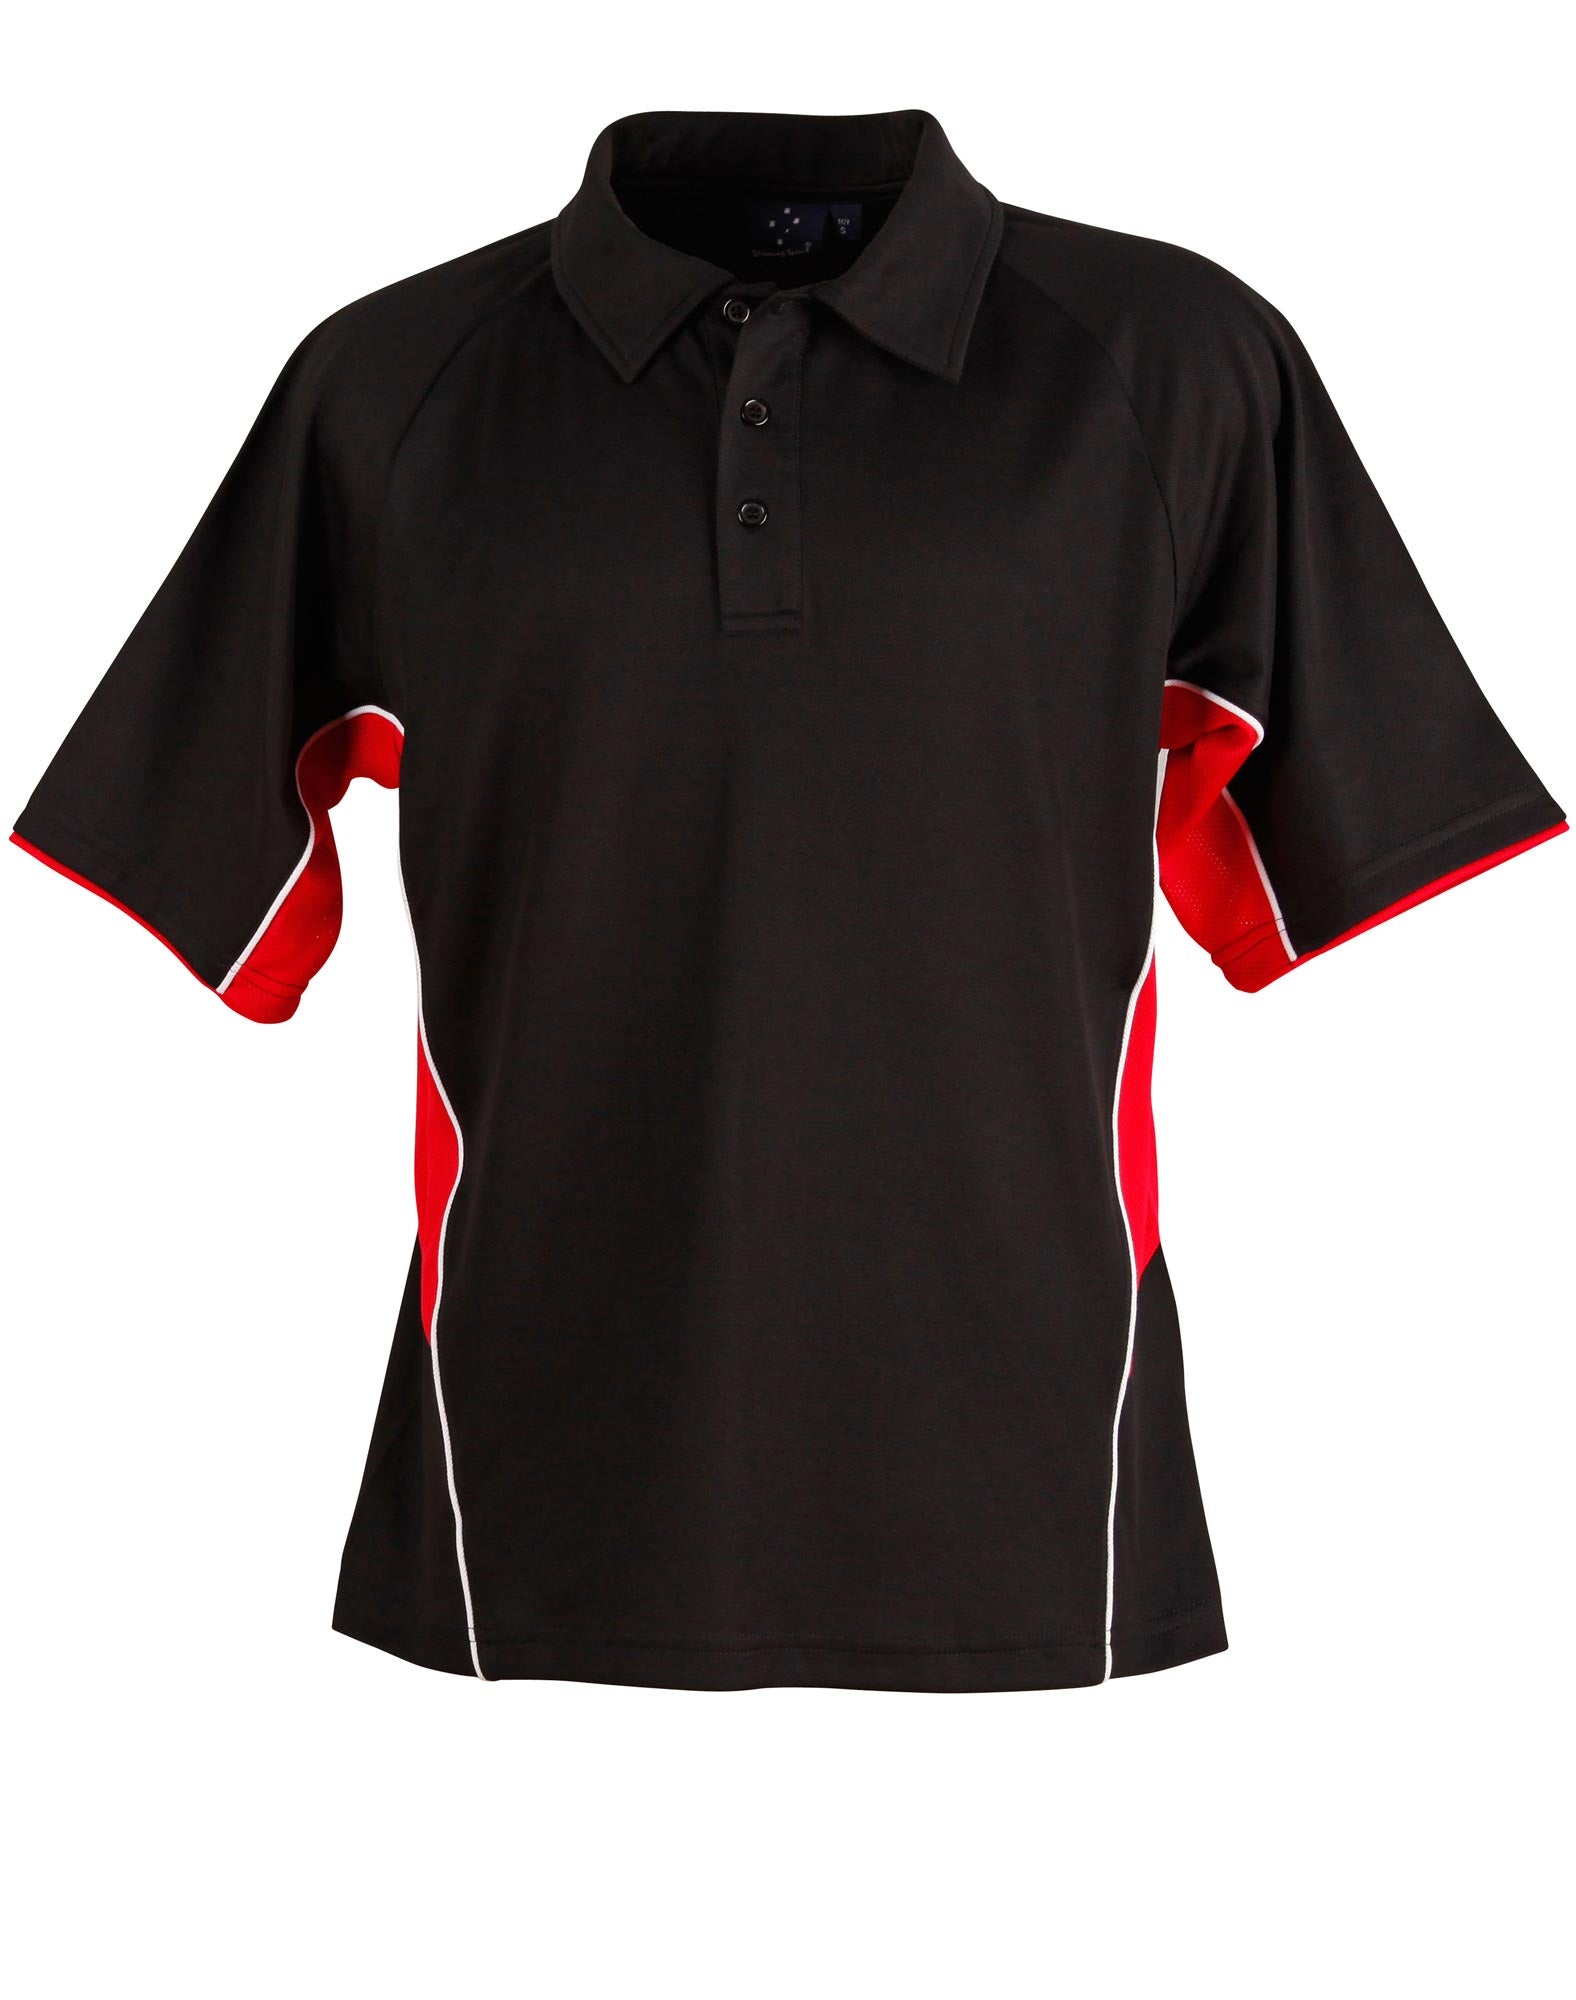 Statesman Truedry Short Sleeve Polo - made by AIW